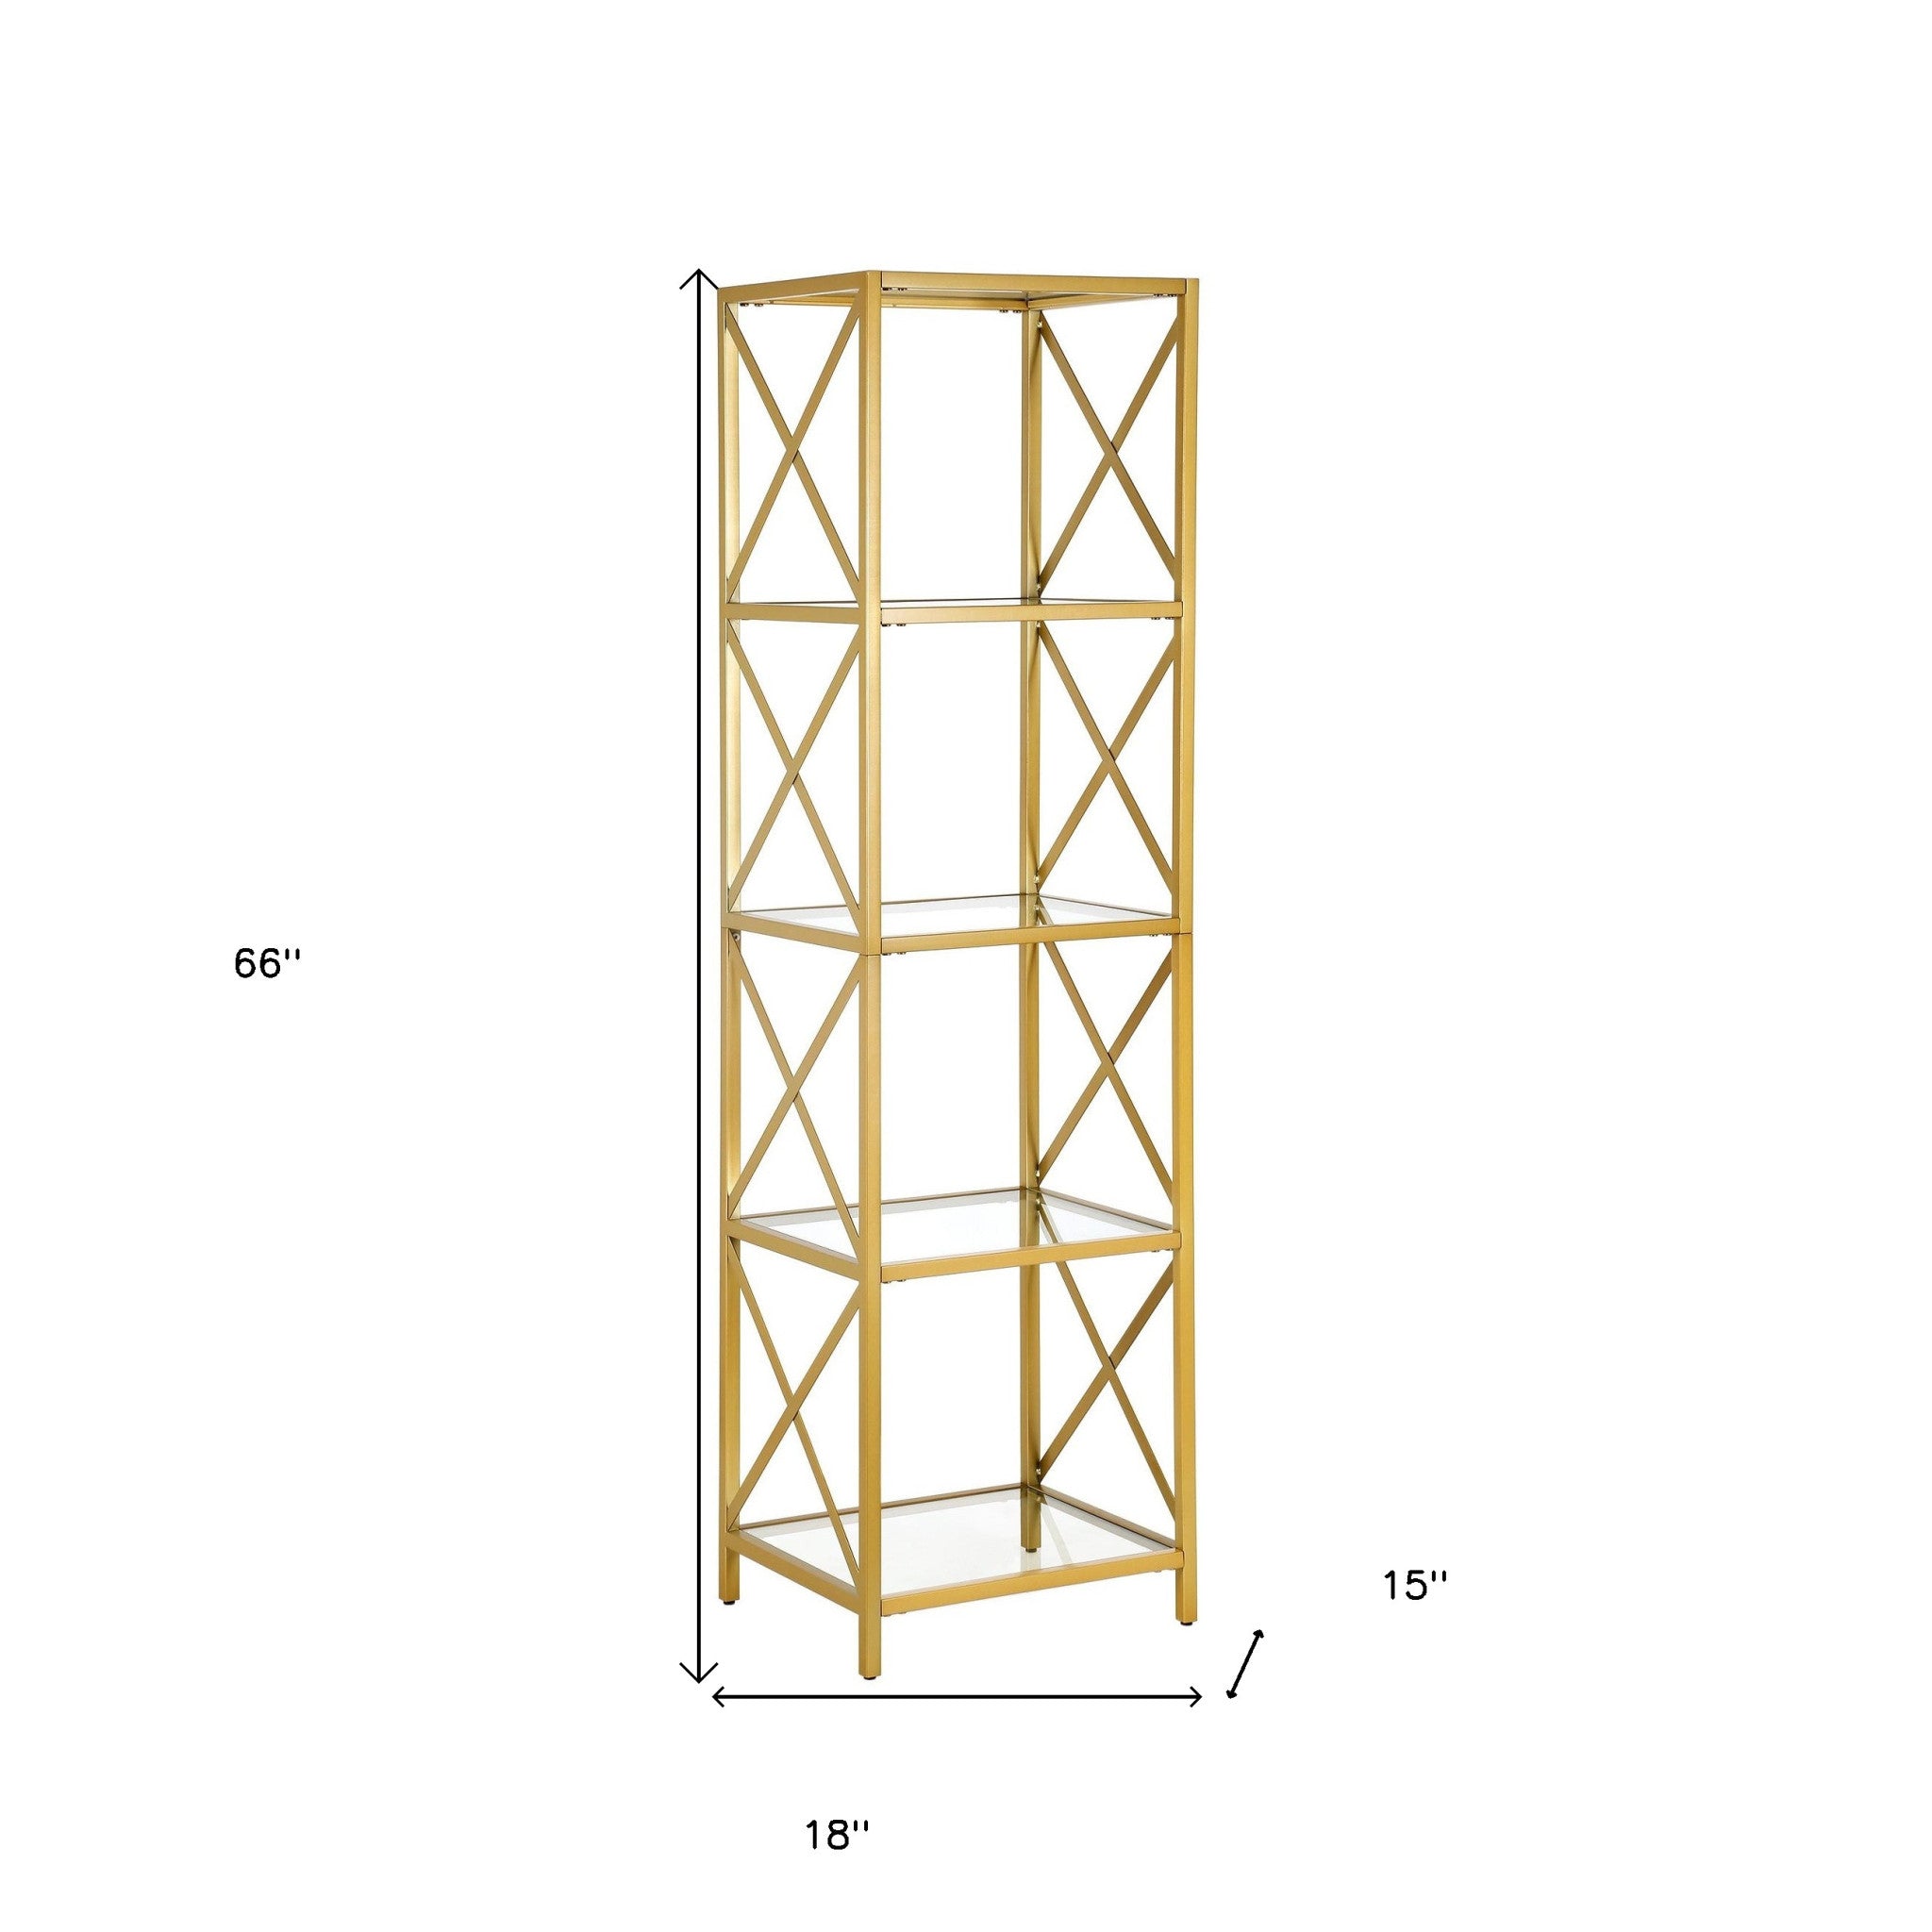 66" Gold Metal And Glass Four Tier Etagere Bookcase